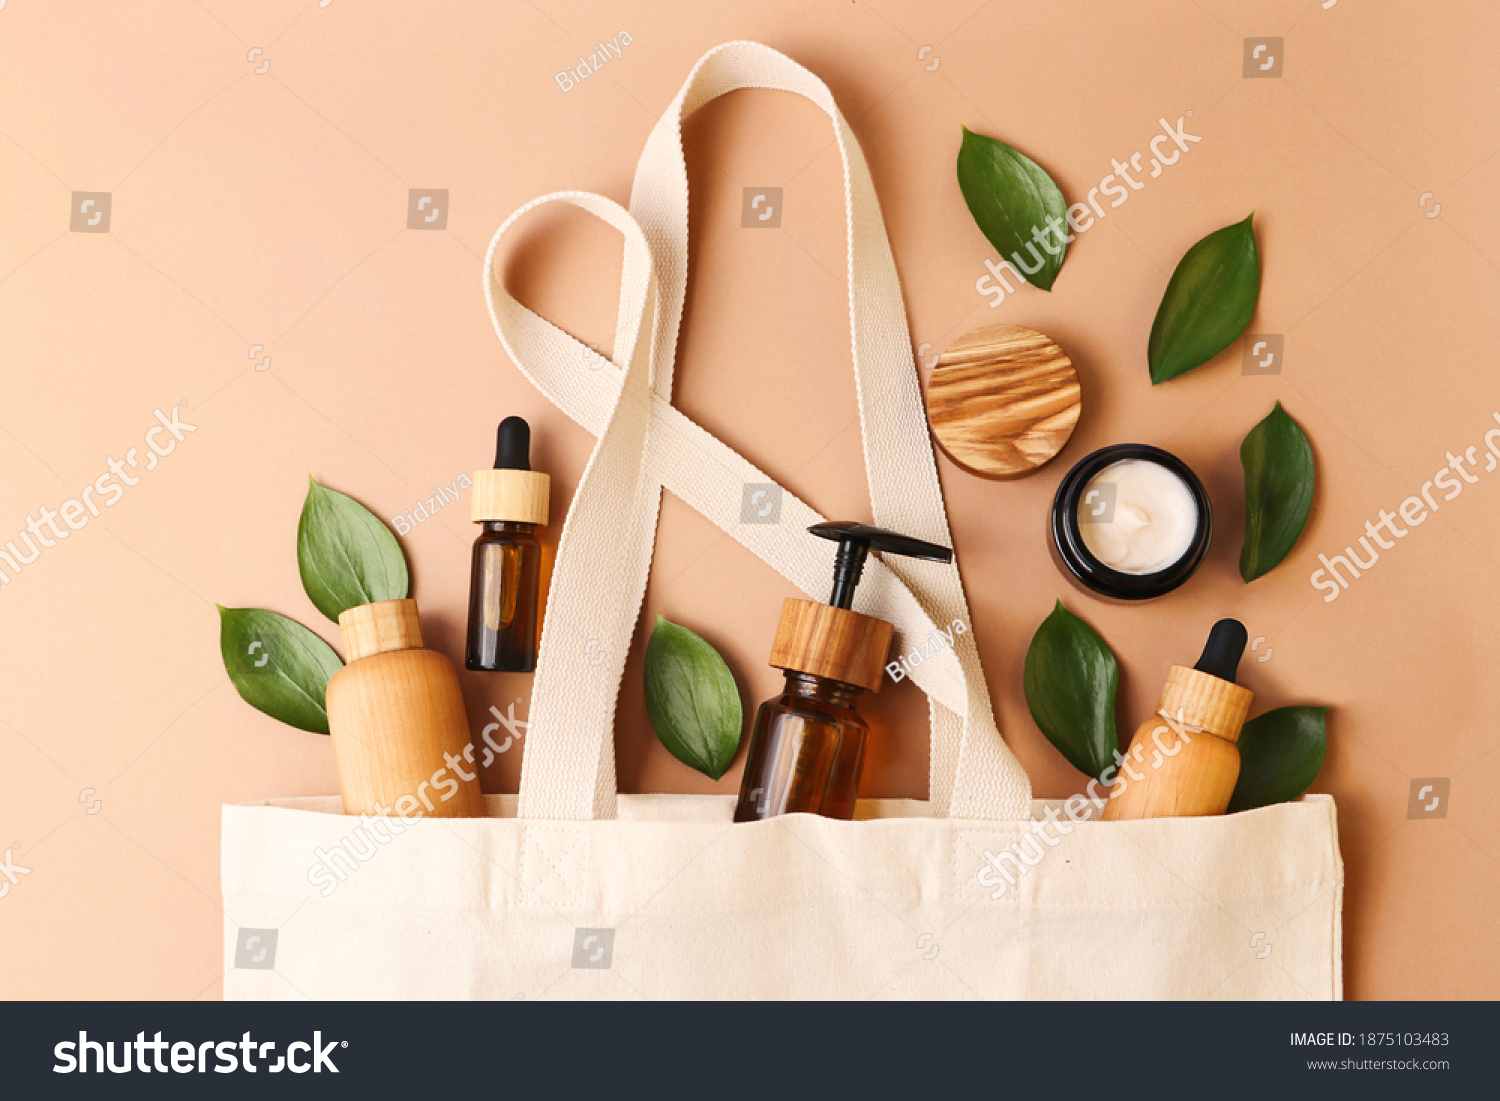 Open eco friendly cotton reusable bag with the different containers from the natural wood and brown glass.Fresh natural leafs around.Concept of organic,zero waste cosmetics.Woman bag with ac?essories. #1875103483